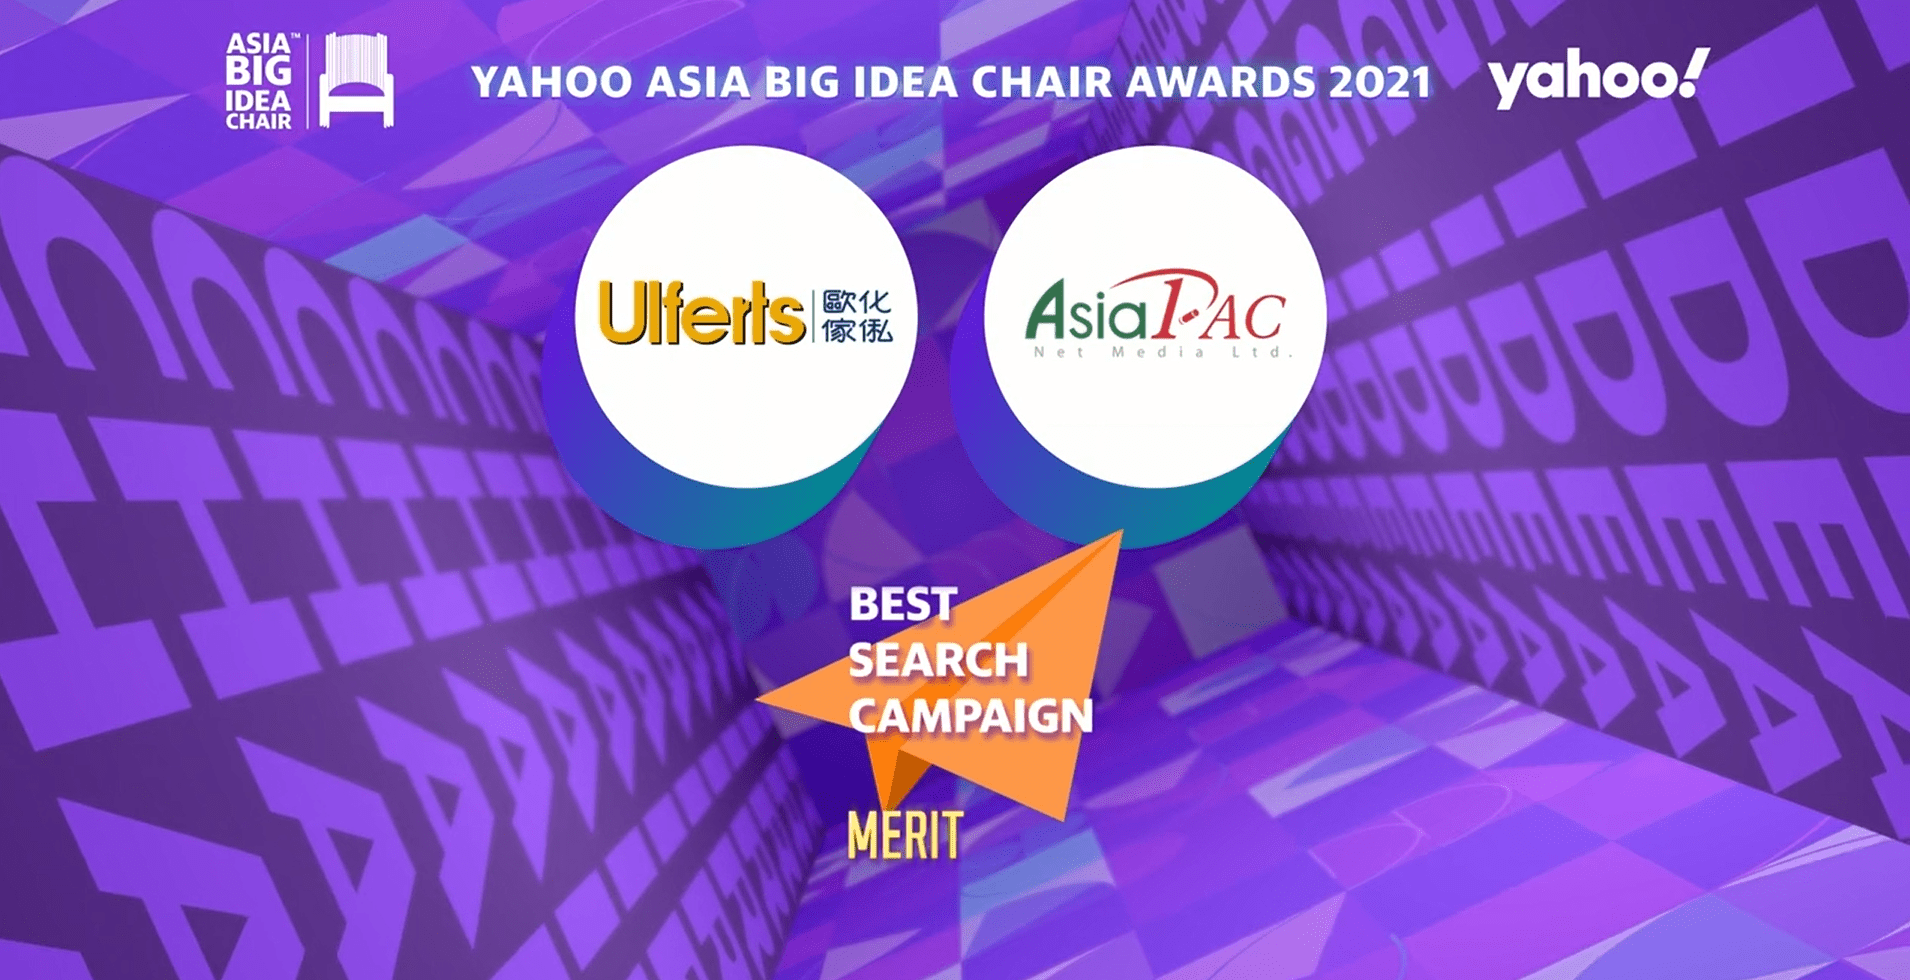 AsiaPac_Yahoo Big Idea Chair Awards 2022_Best Search Campaign